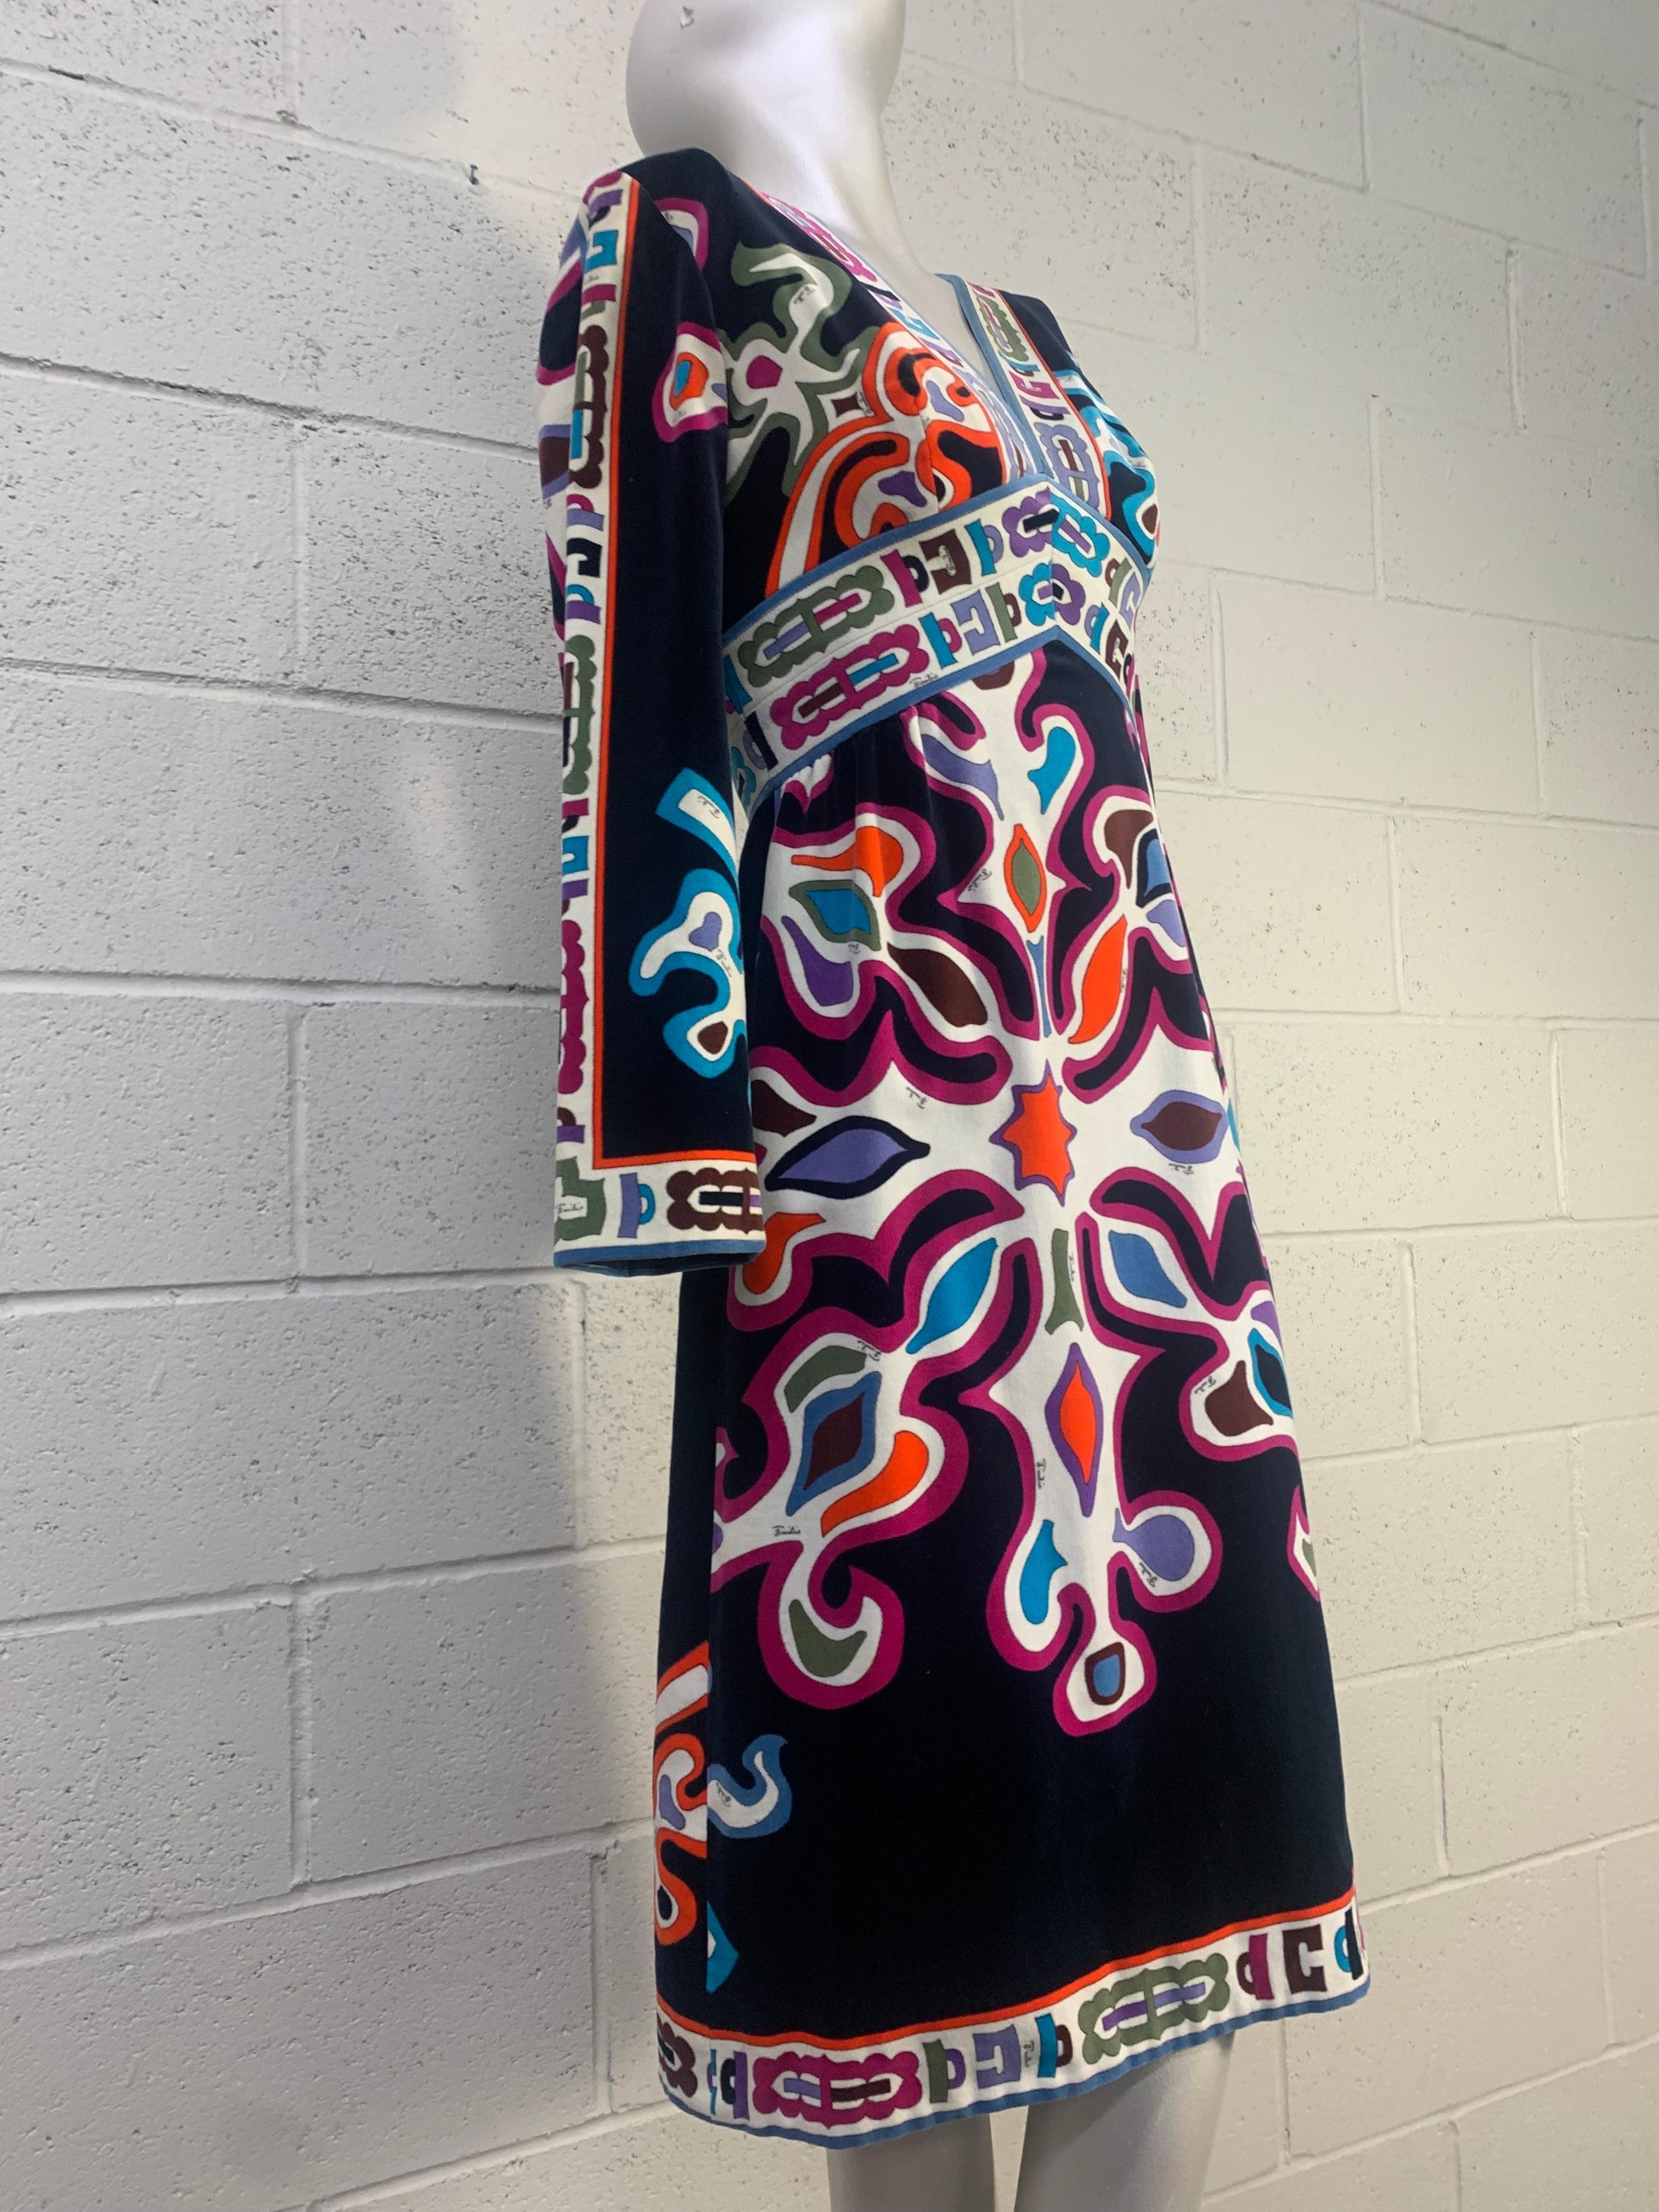 A wonderful 1960s Emilio Pucci cotton velveteen knee-length dress in classic Pucci colorful print, V-neck line, Empire waist, and long sleeves. Side and back zipper. Fully lined. US size 4.